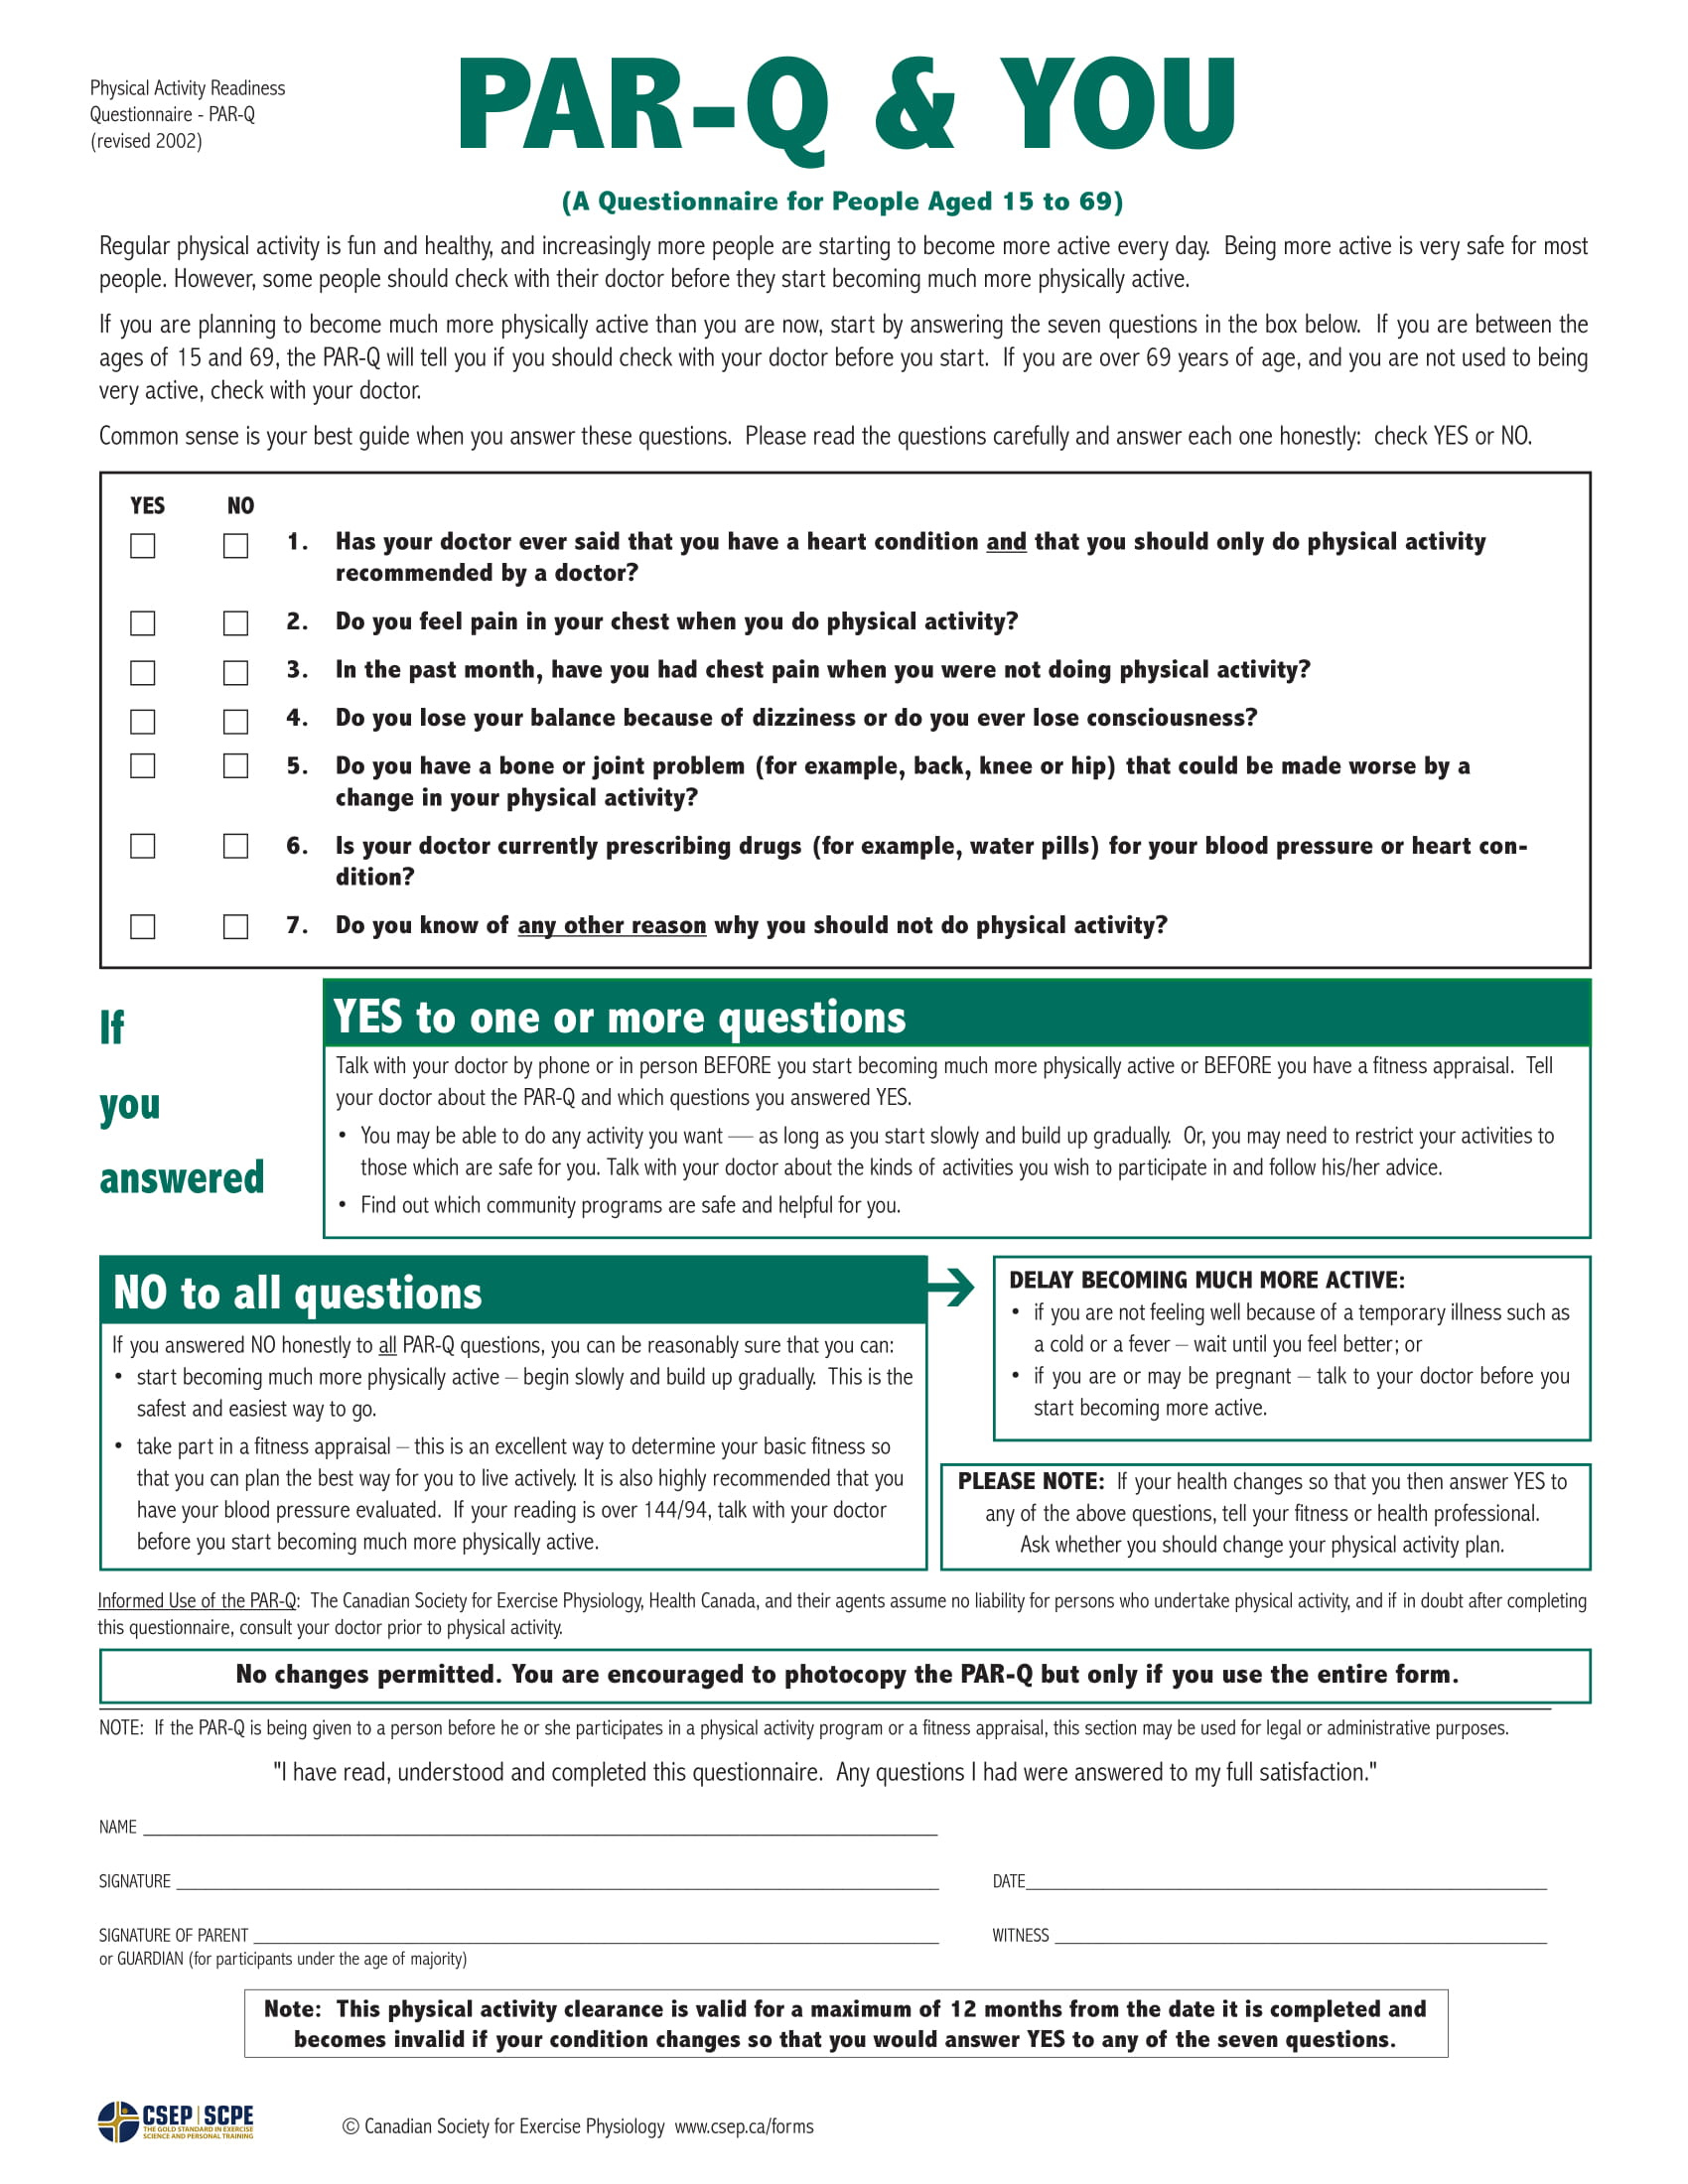 Physical Activity Readiness Form Pdf.